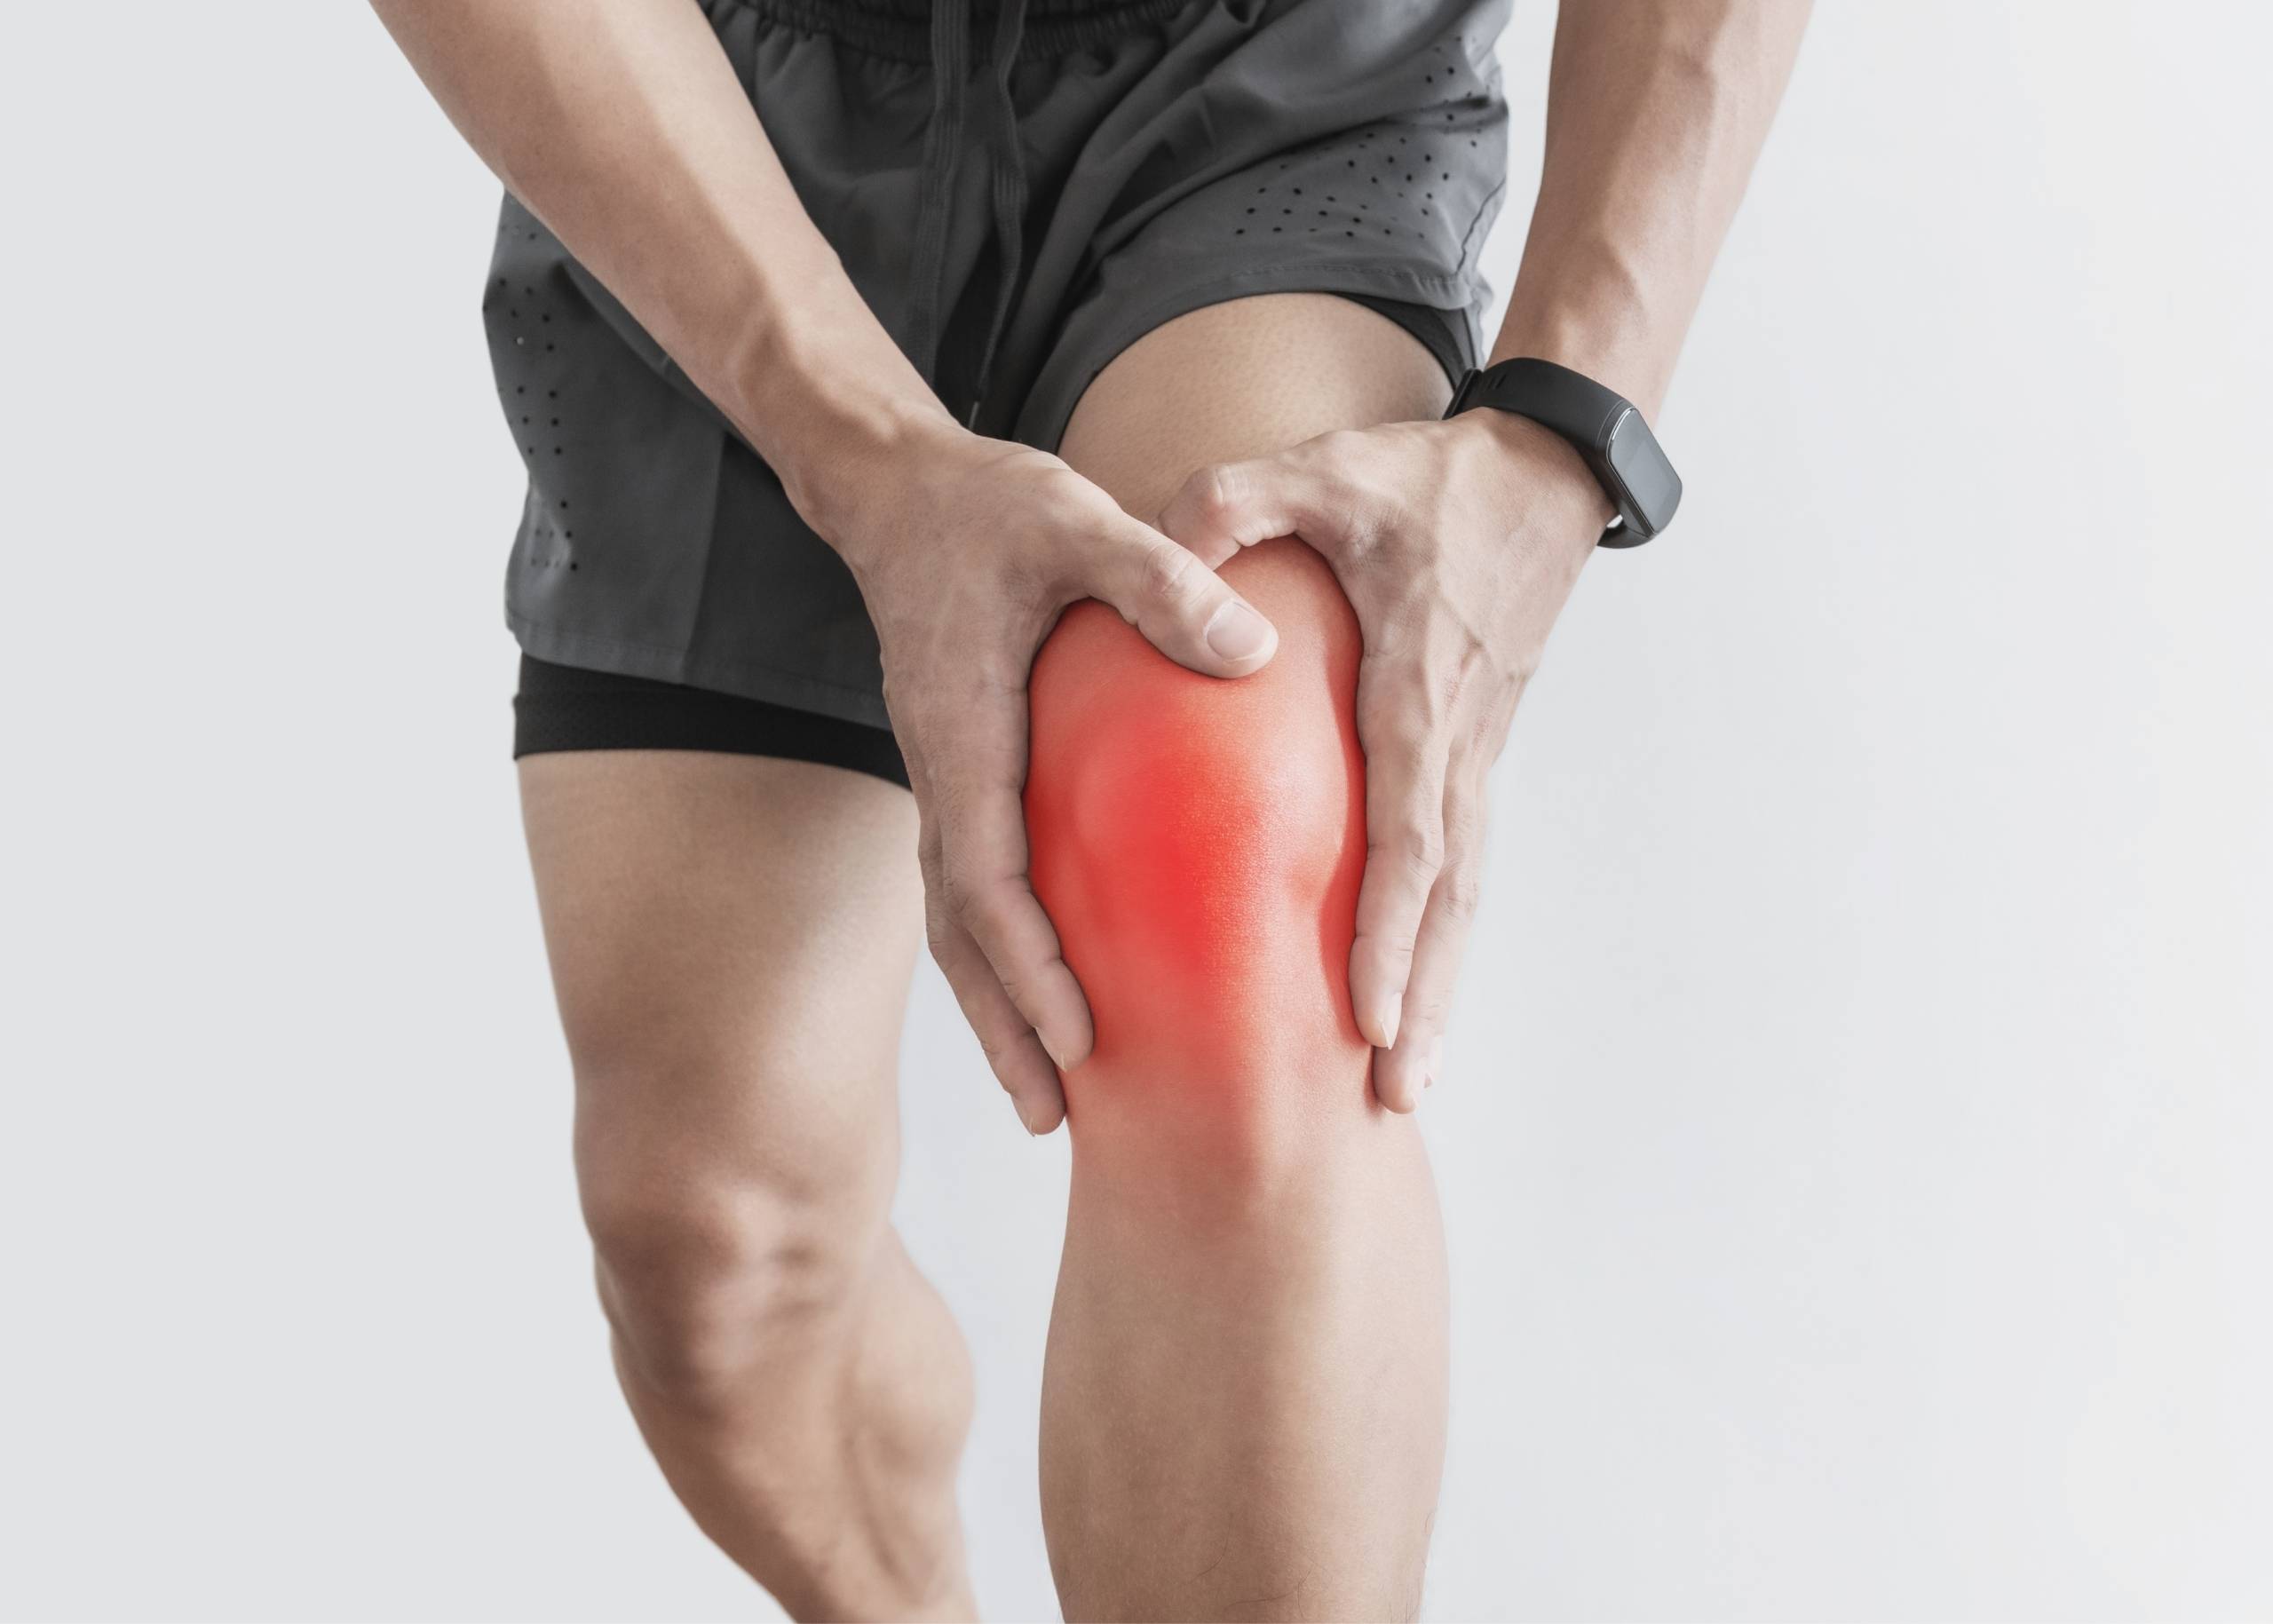 A Handbook for Identifying and Treating Knee Pain